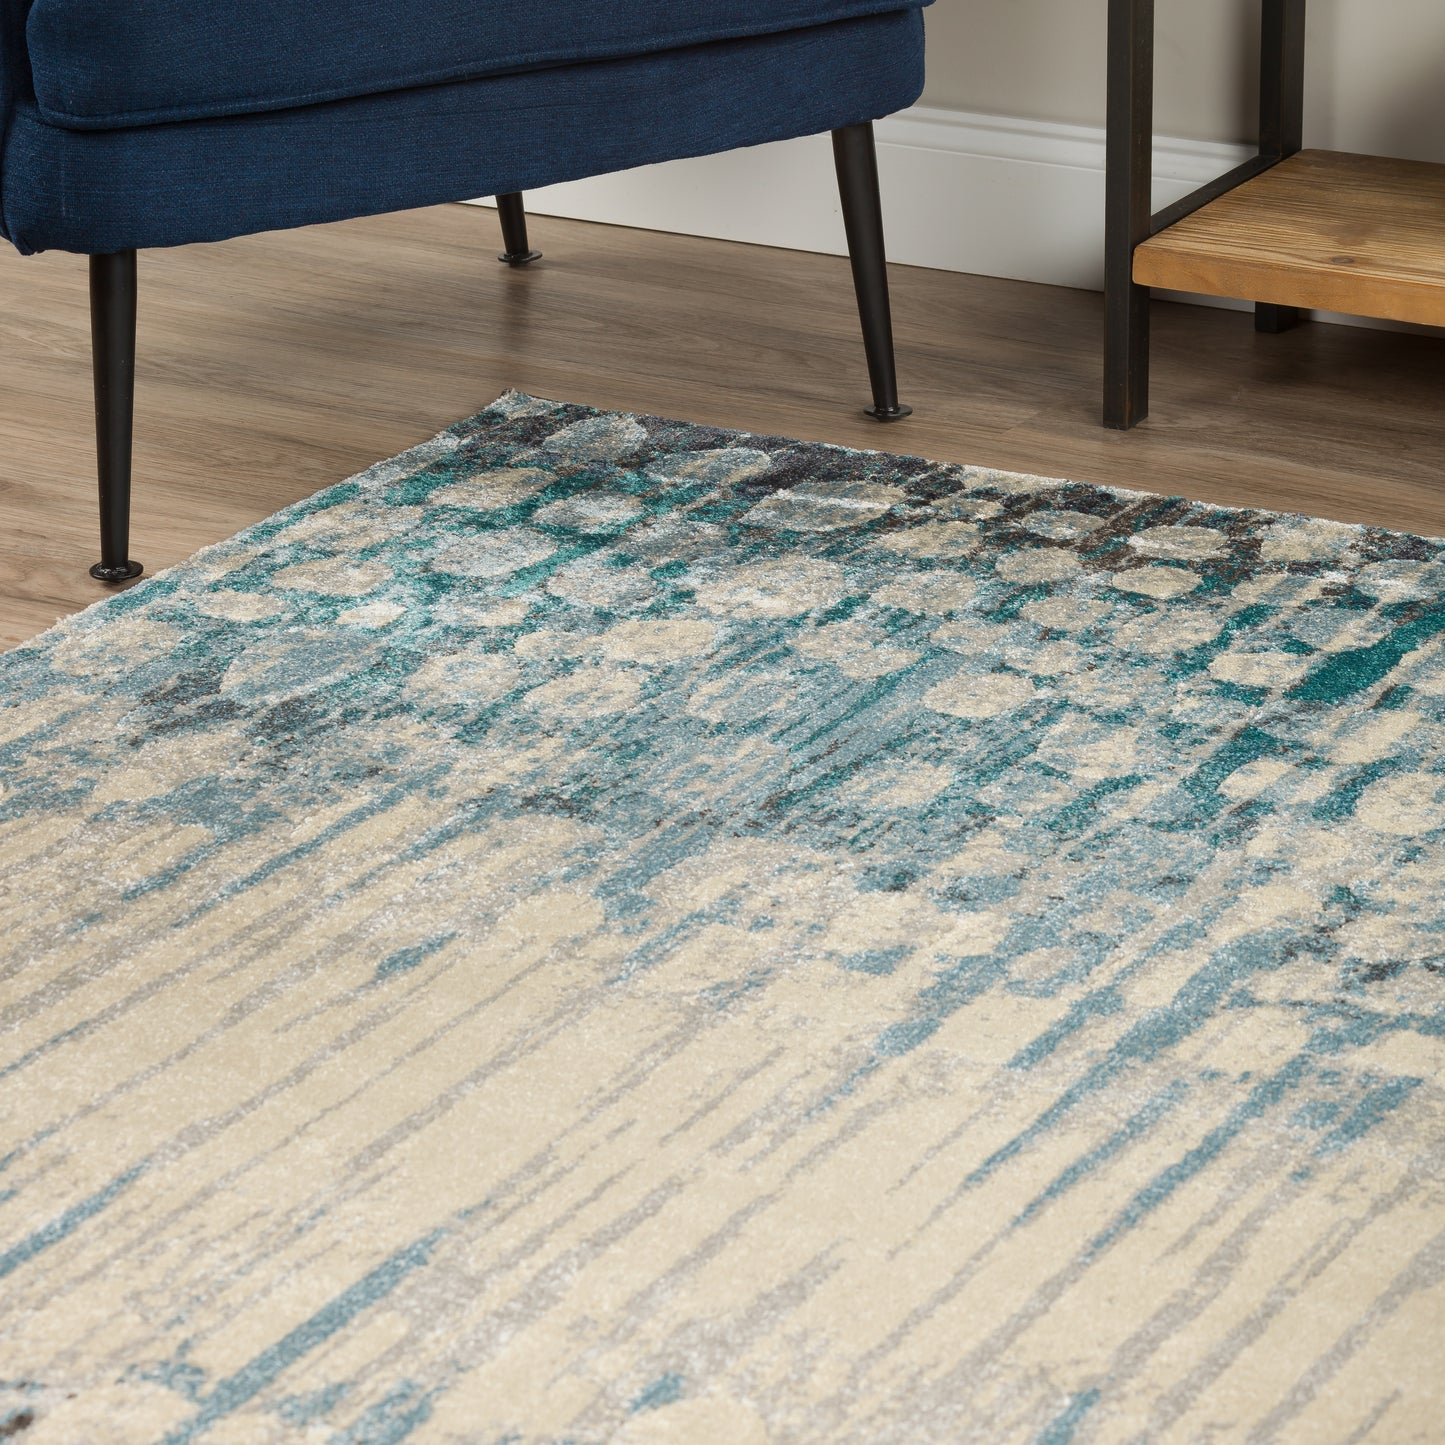 Upton UP5 Machine Woven Synthetic Blend Indoor Area Rug by Dalyn Rugs